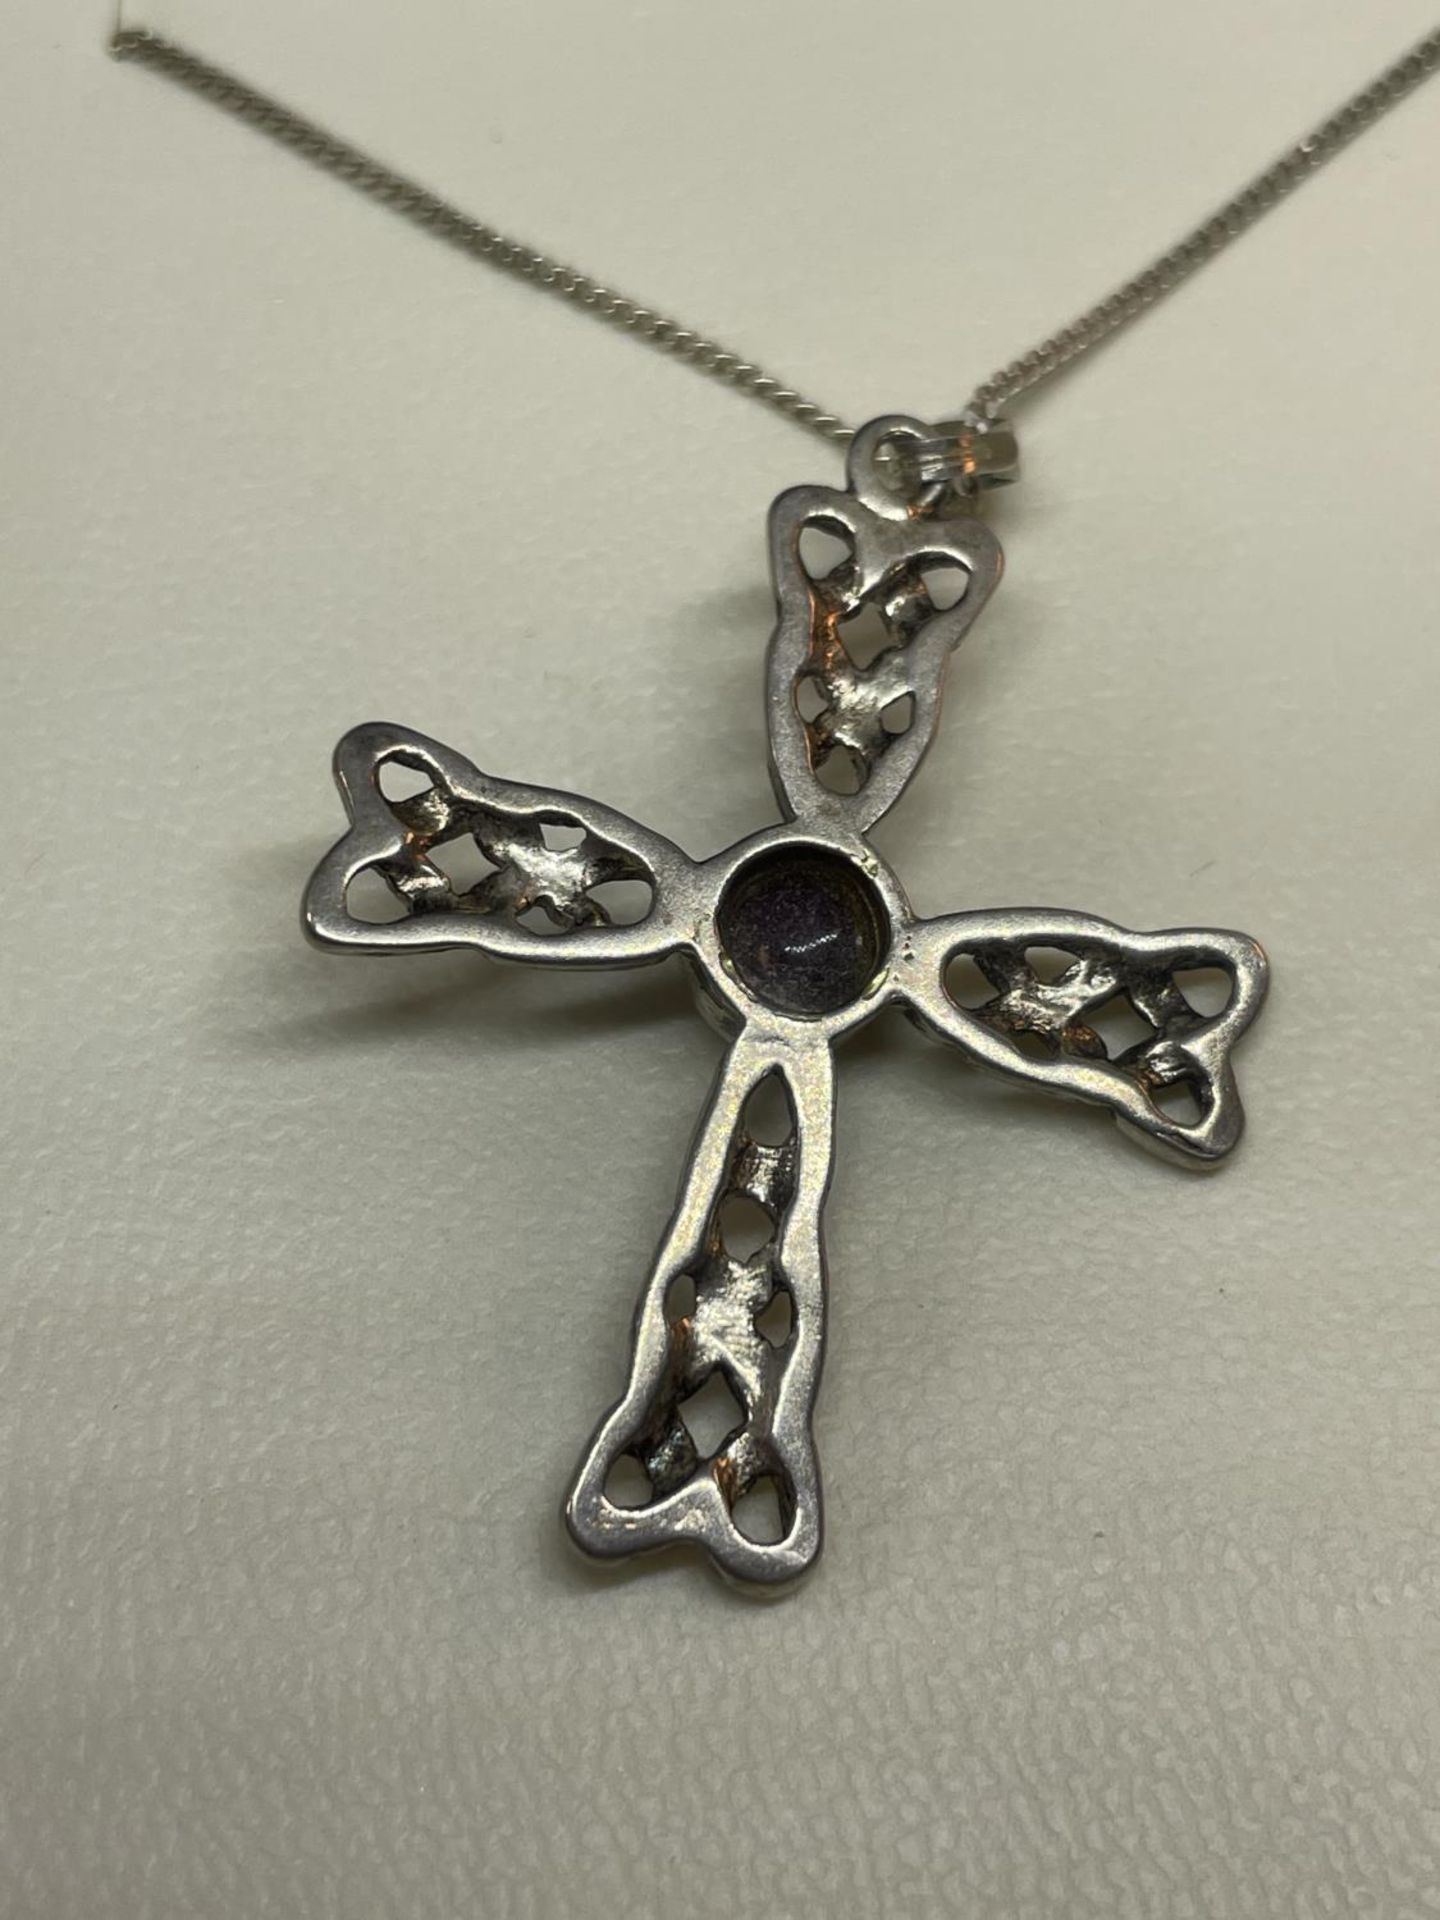 A SILVER CHAIN AND CRUCIFIX IN A PRESENTATION BOX - Image 3 of 3